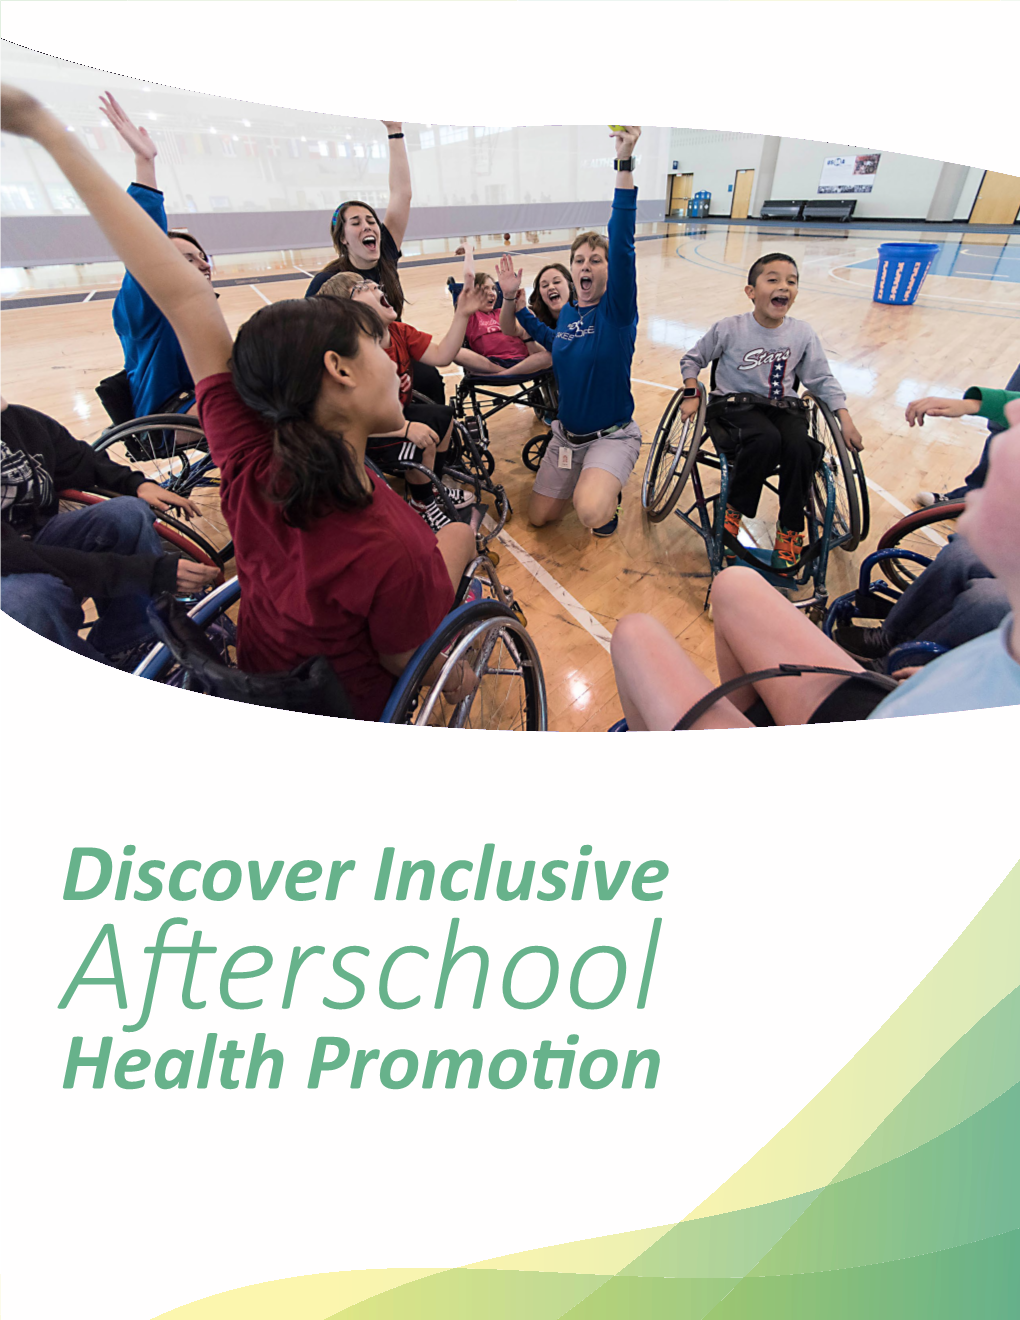 Discover Inclusive Afterschool Health Promotion